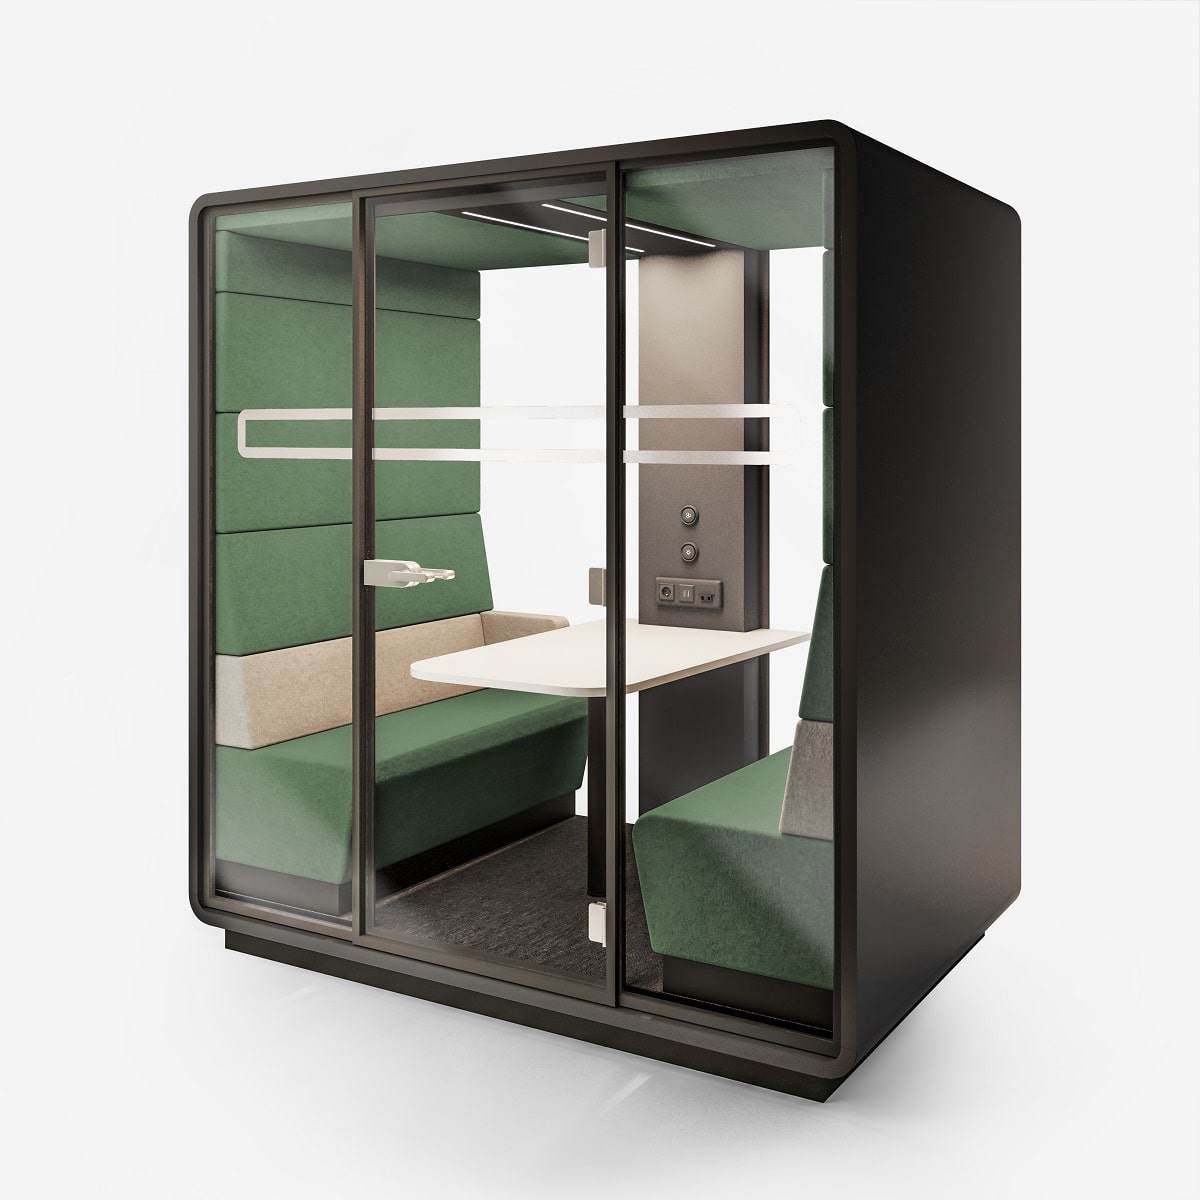 HushMeet is a quiet, sound-insulating pod for rowdy coworking. It's complete with every feature needed for focused meetings.